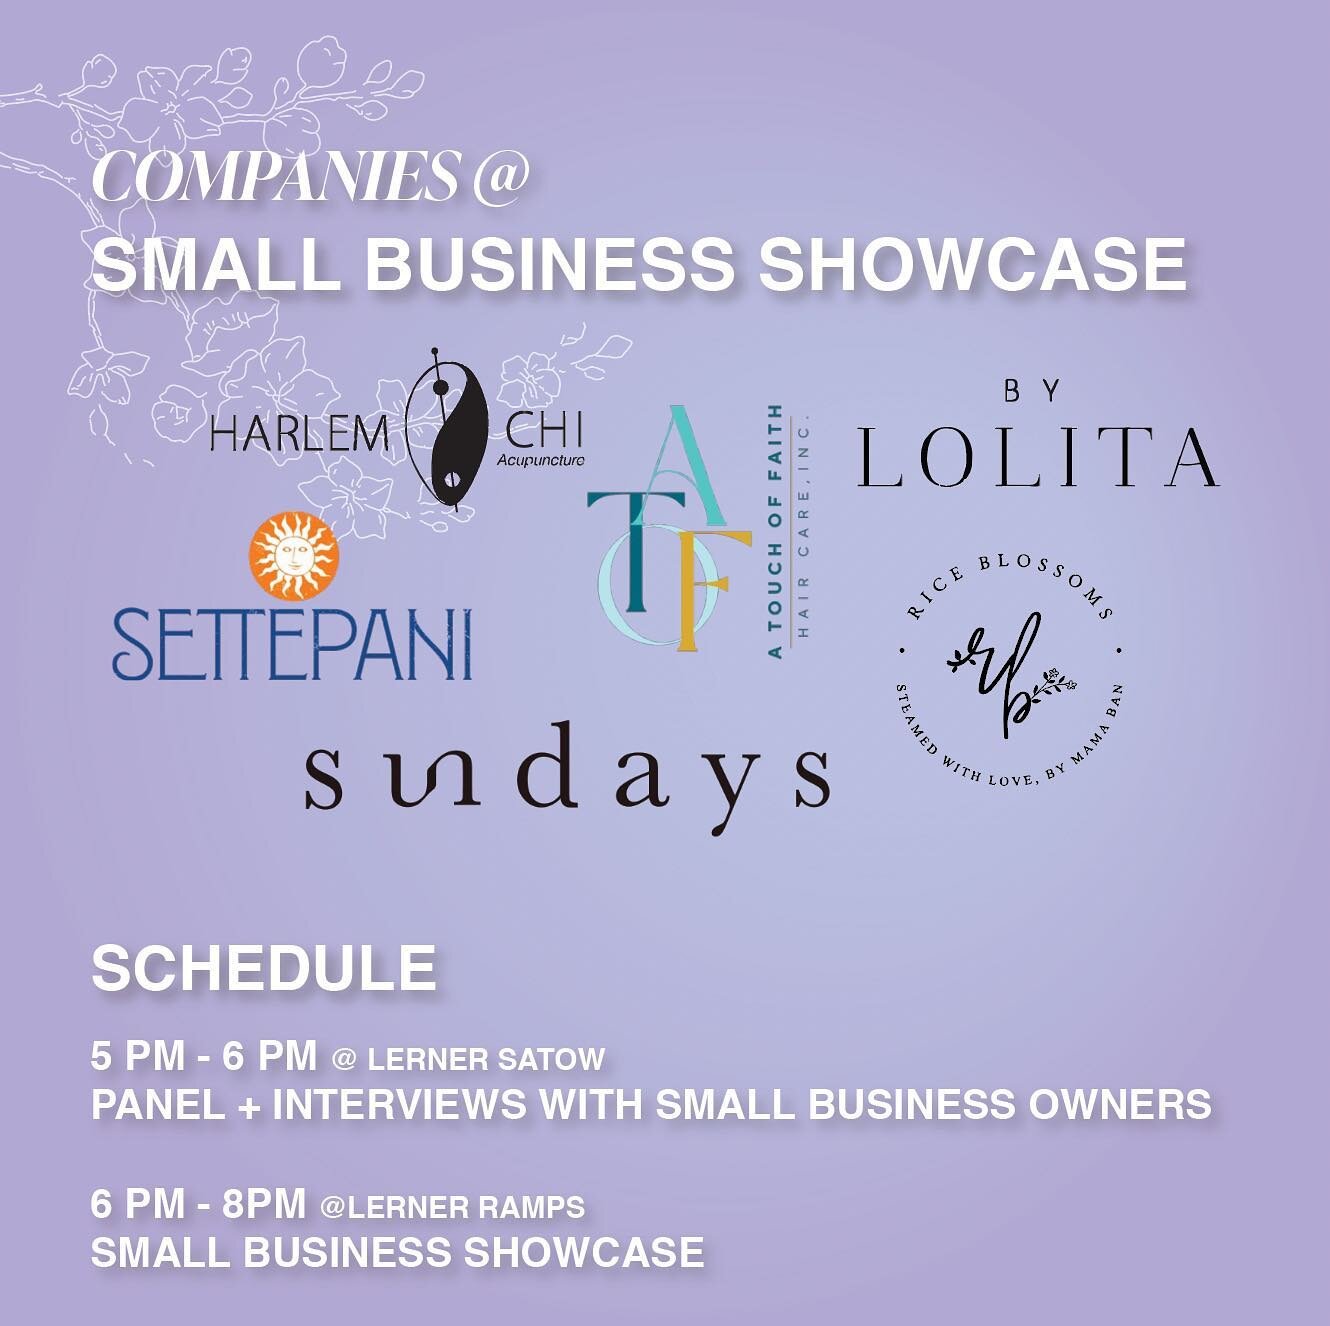 The Small Business Showcase is happening TOMORROW!! We are so excited to see everyone there- reserve your spot at the link in our bio today 🪷💫